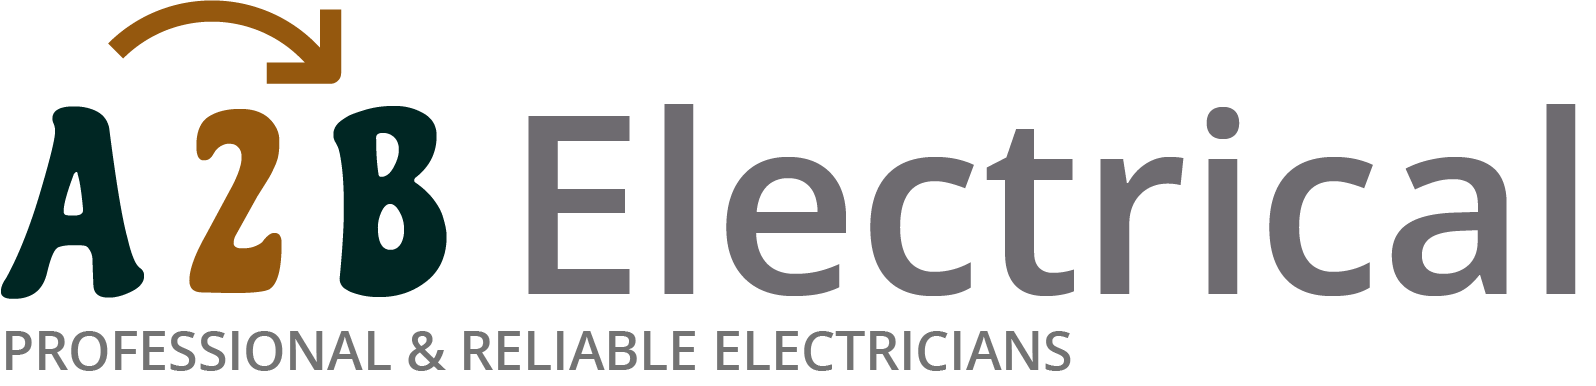 If you have electrical wiring problems in Altrincham, we can provide an electrician to have a look for you. 